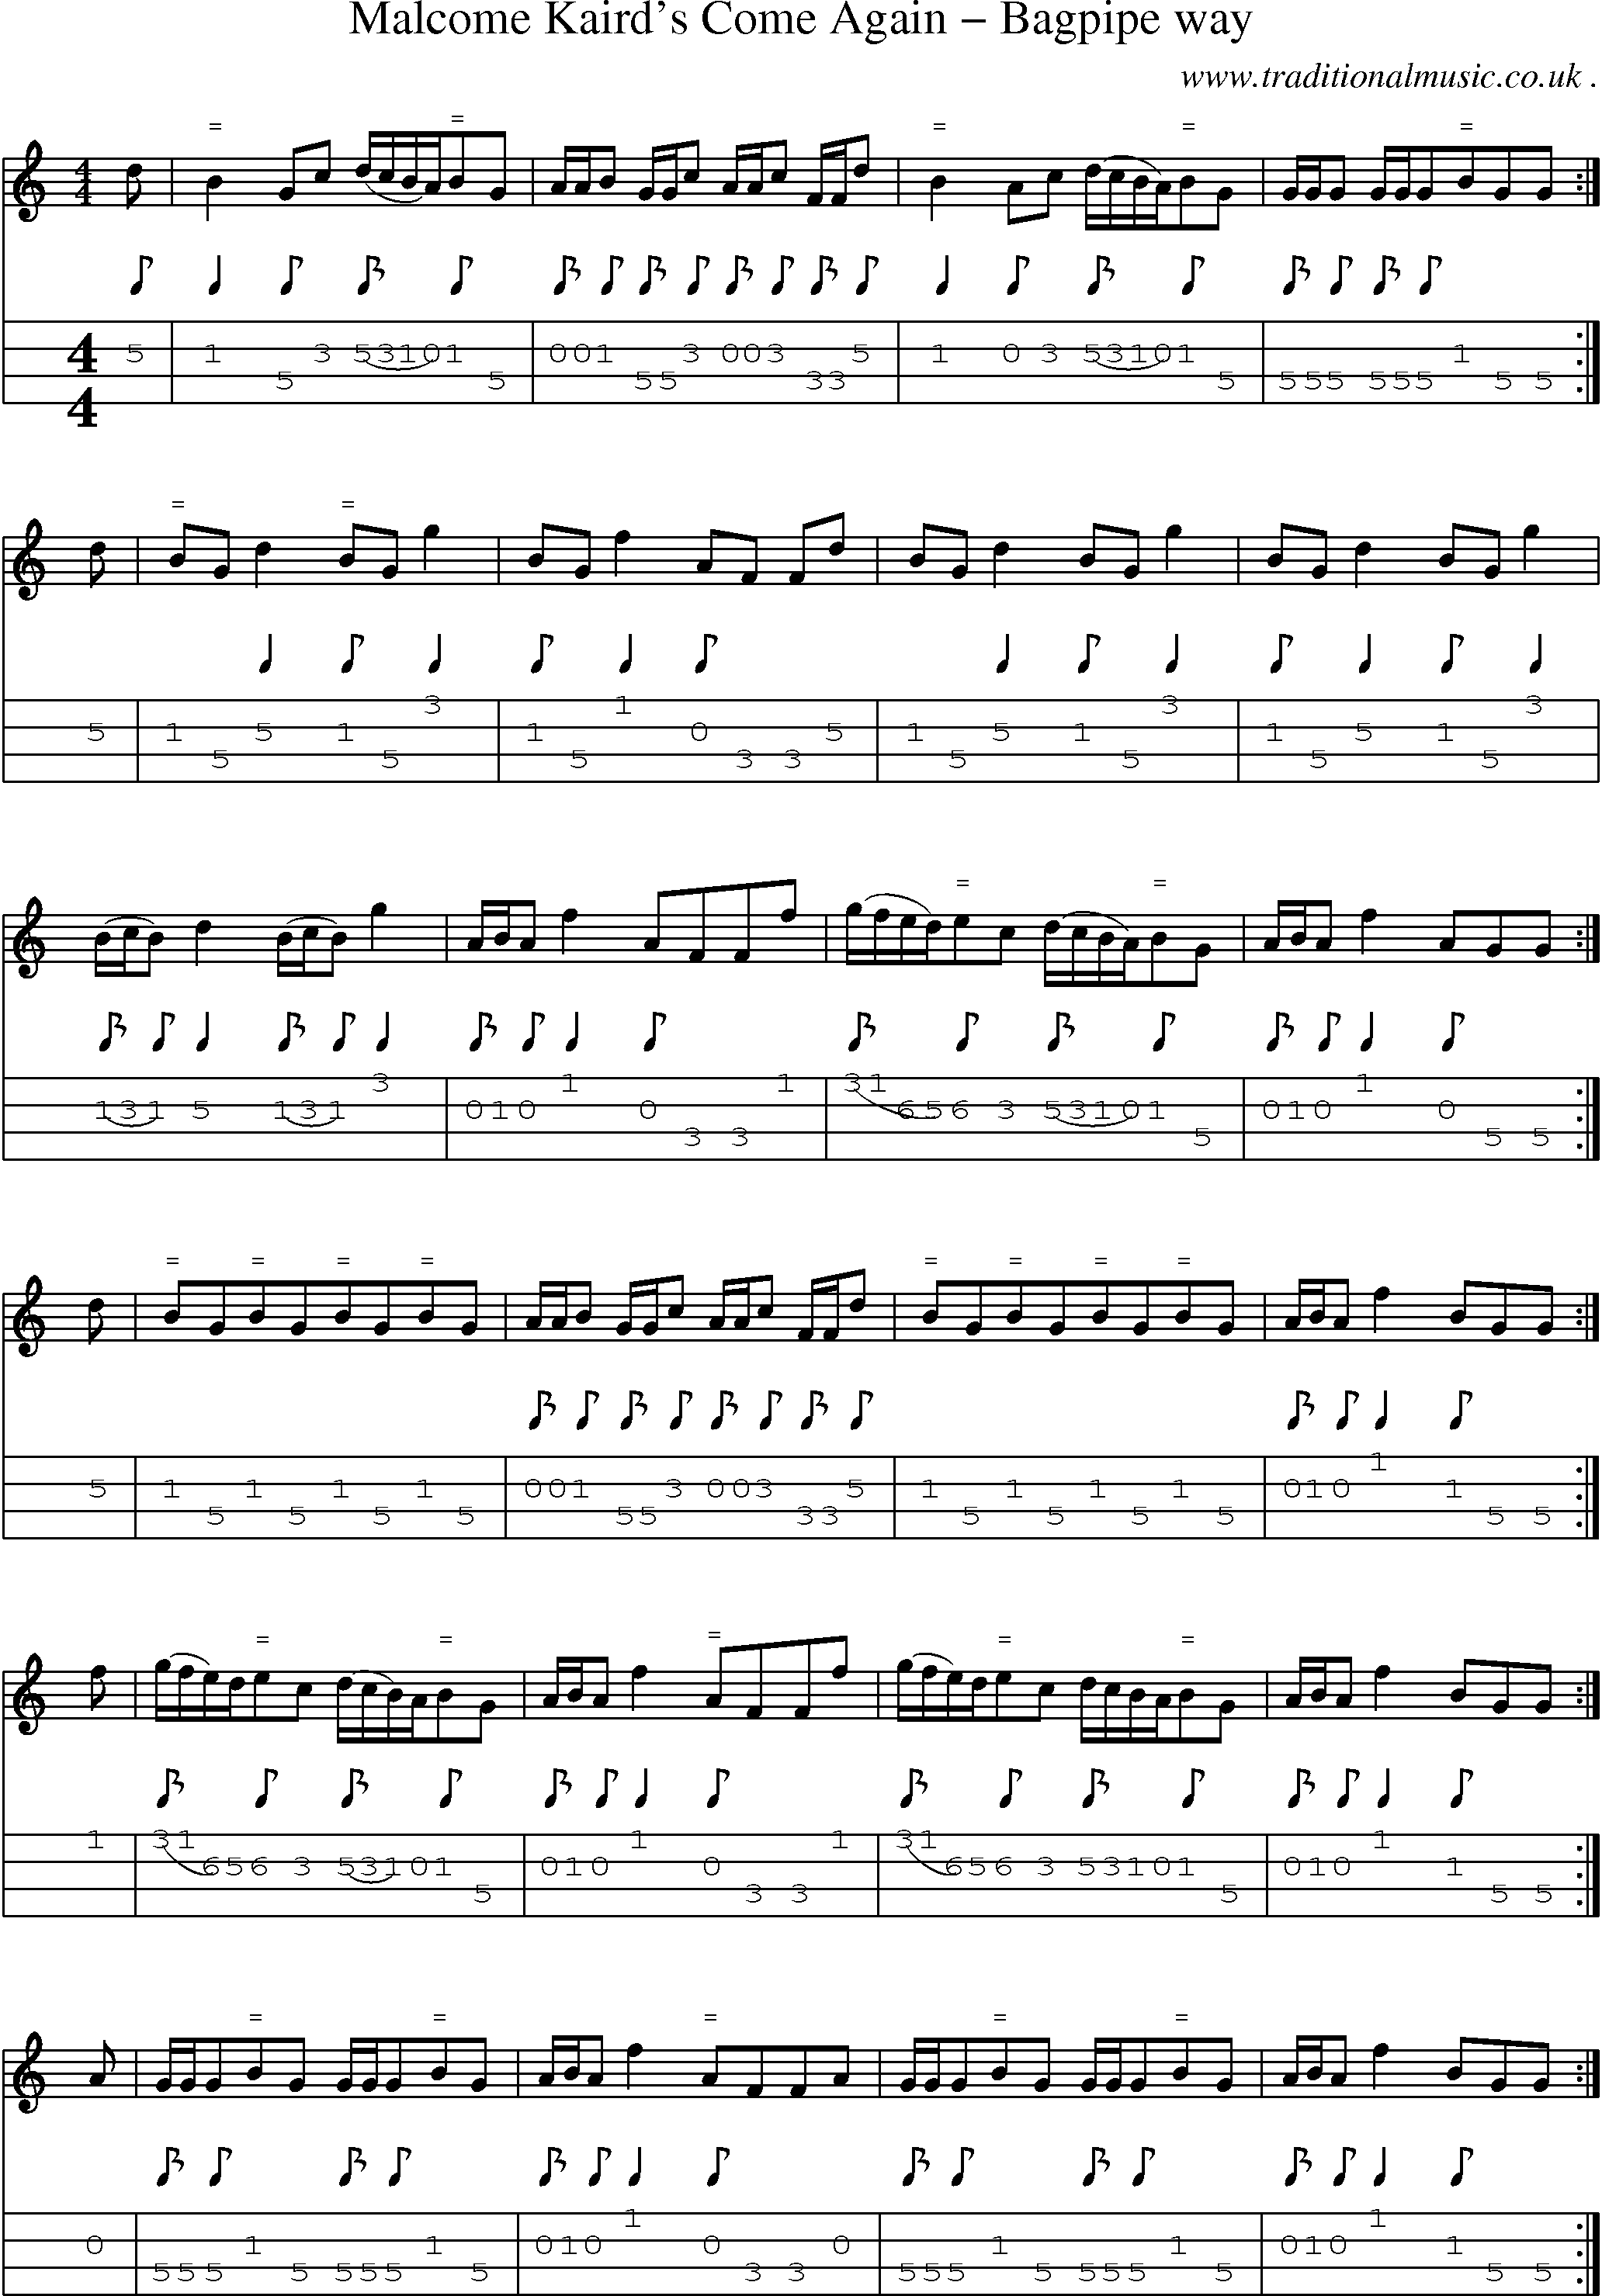 Sheet-Music and Mandolin Tabs for Malcome Kairds Come Again Bagpipe Way